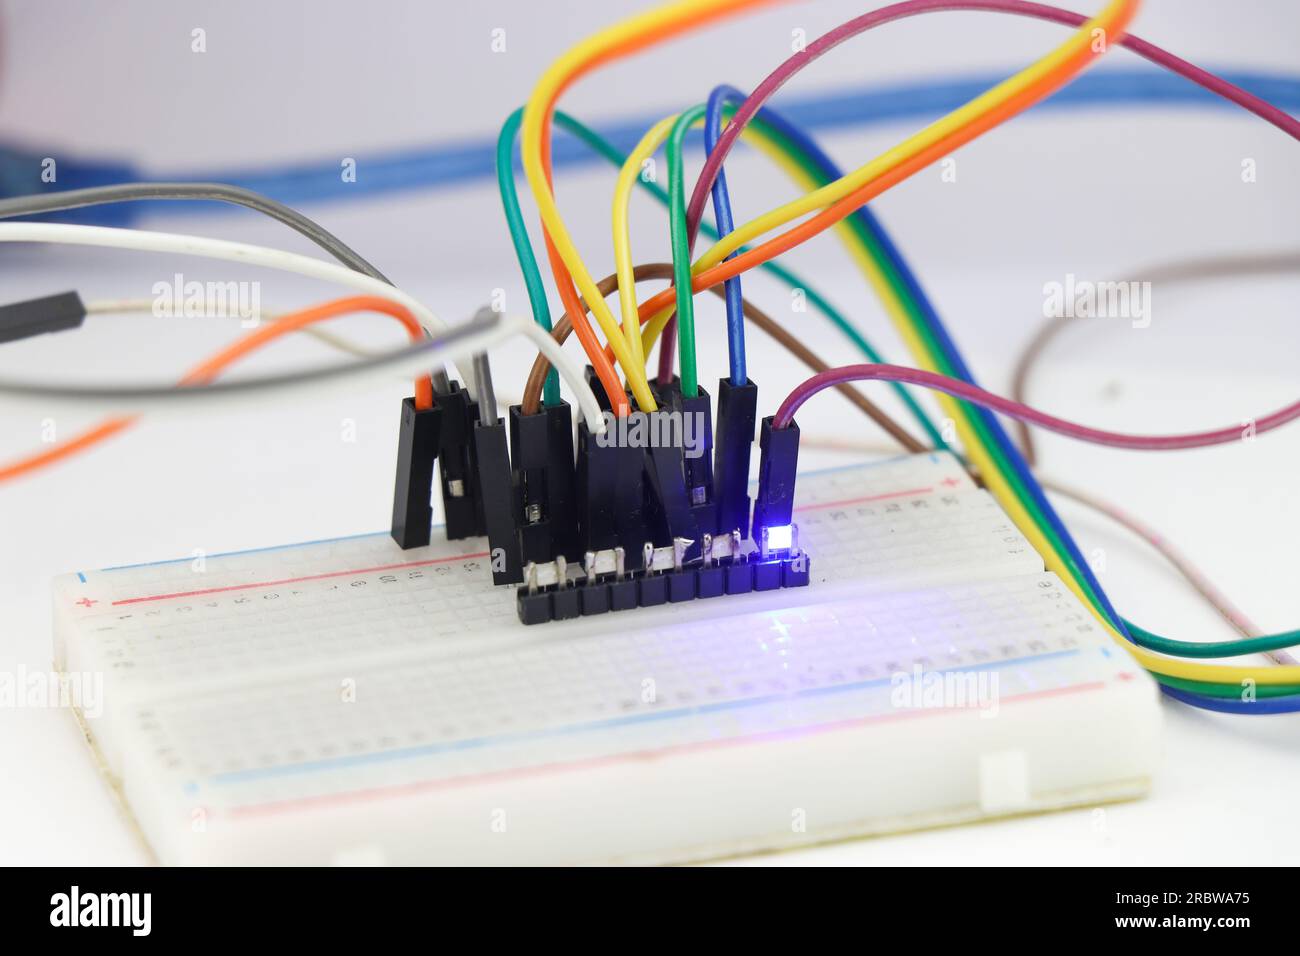 Group of SMD led on a breadboard connected with jumper wires and emitting a blue light Stock Photo